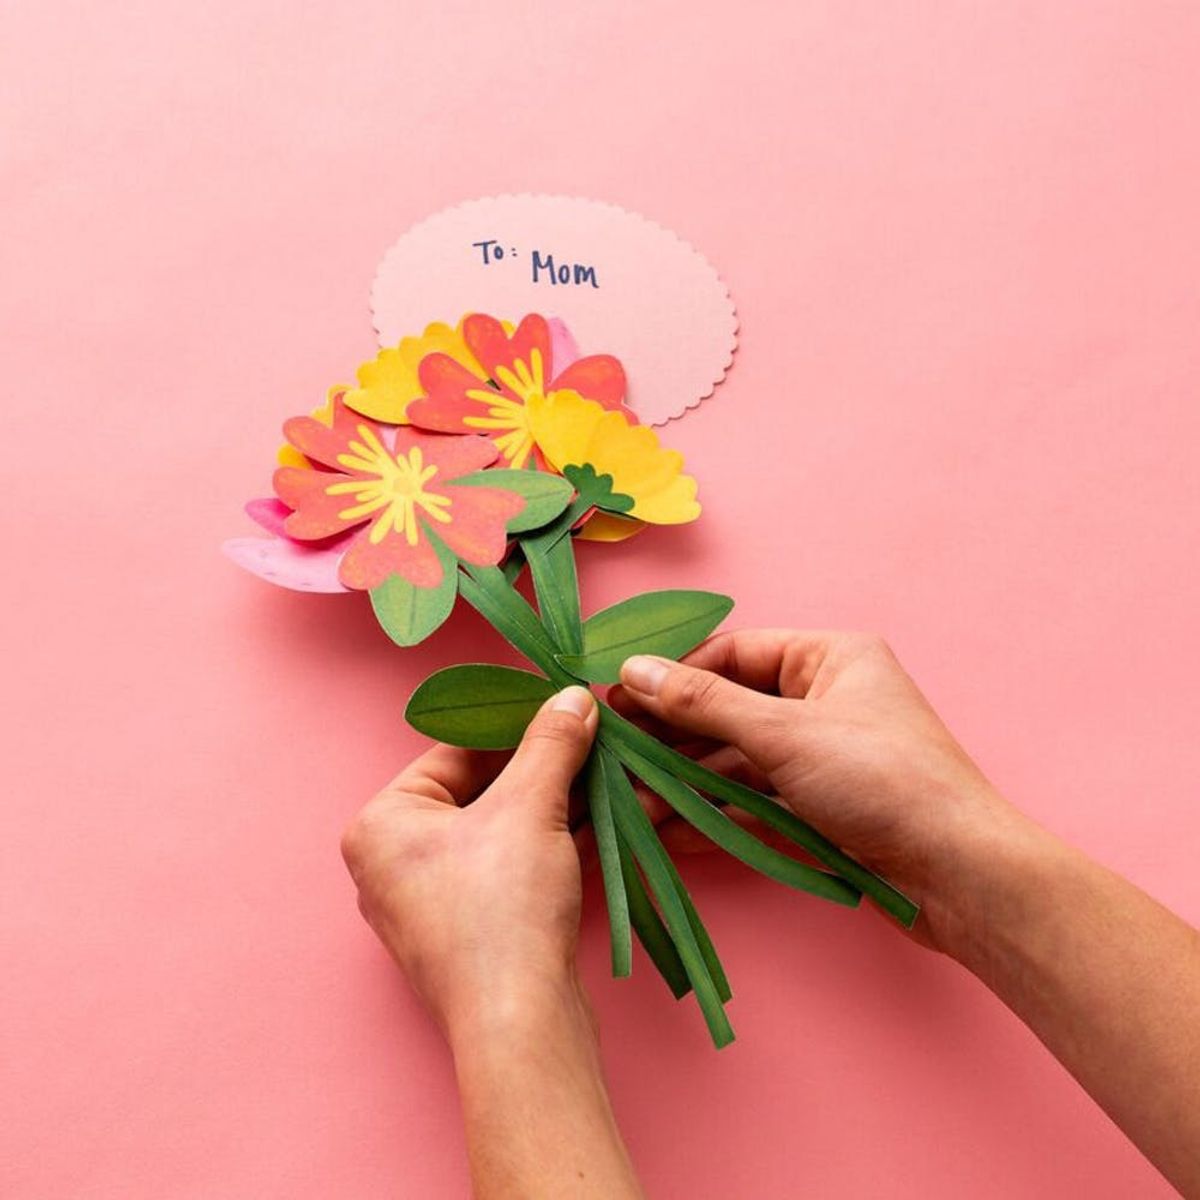 This Pretty Paper Flower Bouquet Is the Lasting Mother’s Day Gift You’ve Been Looking for